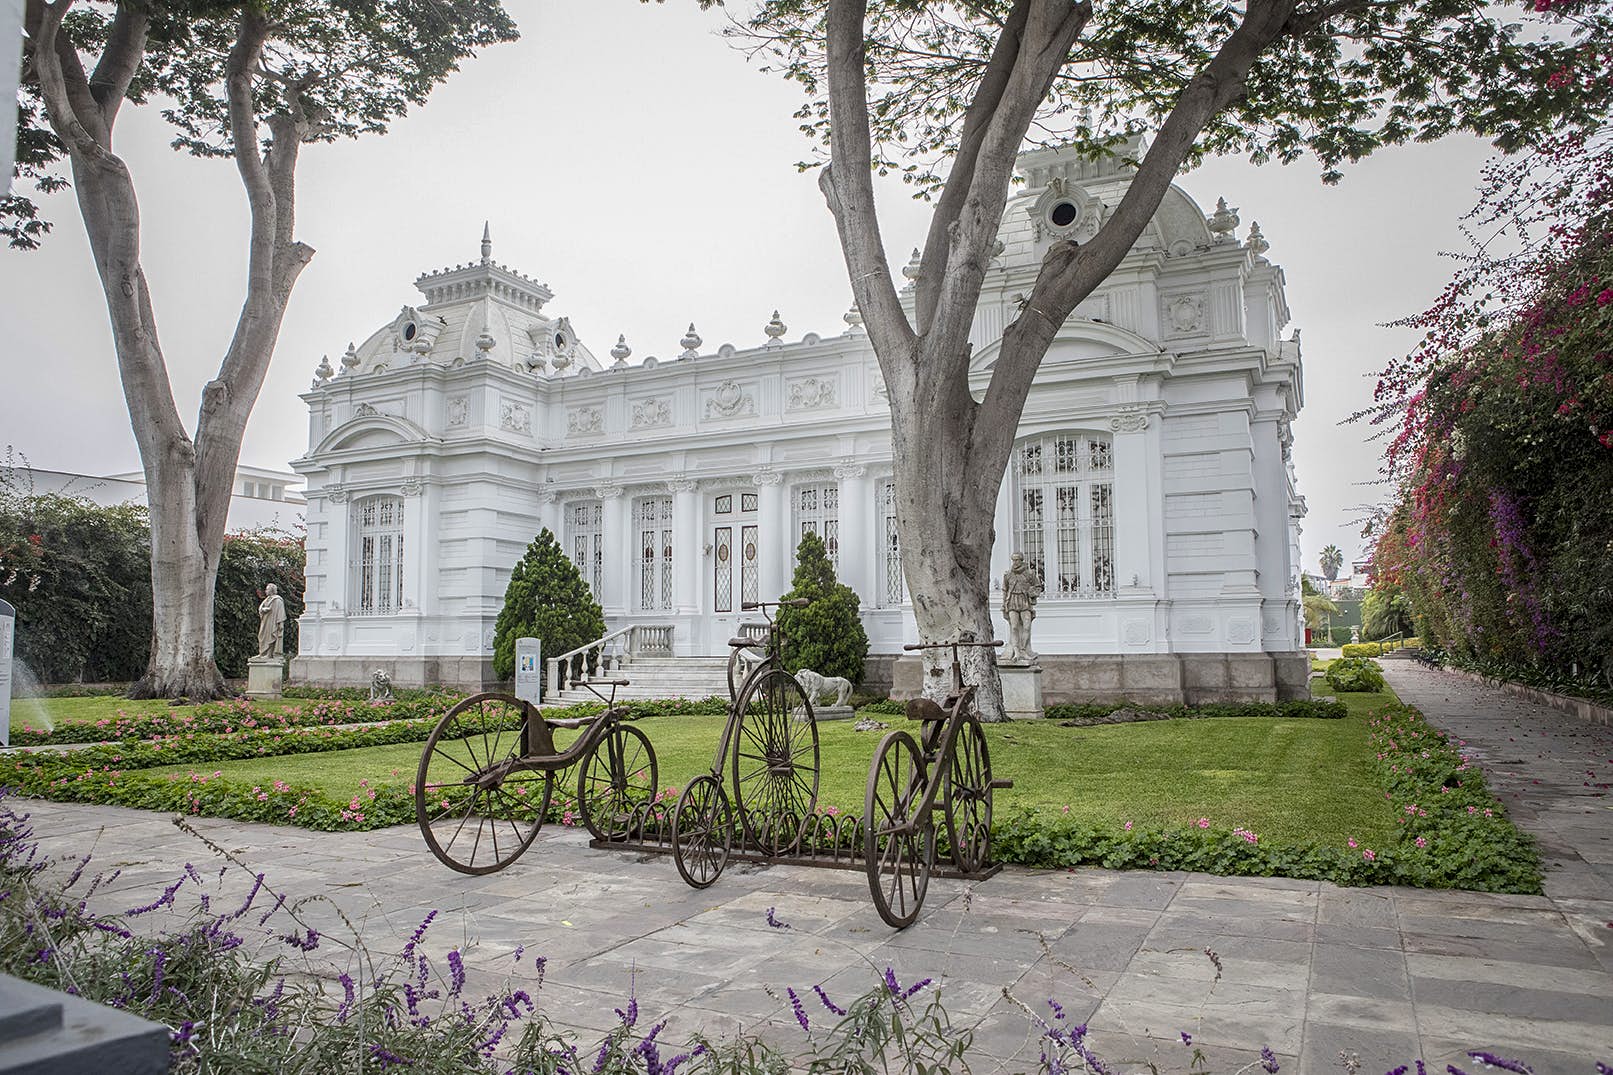 Osma Museum: The Early 20th Century Summer Mansion turned Art Museum